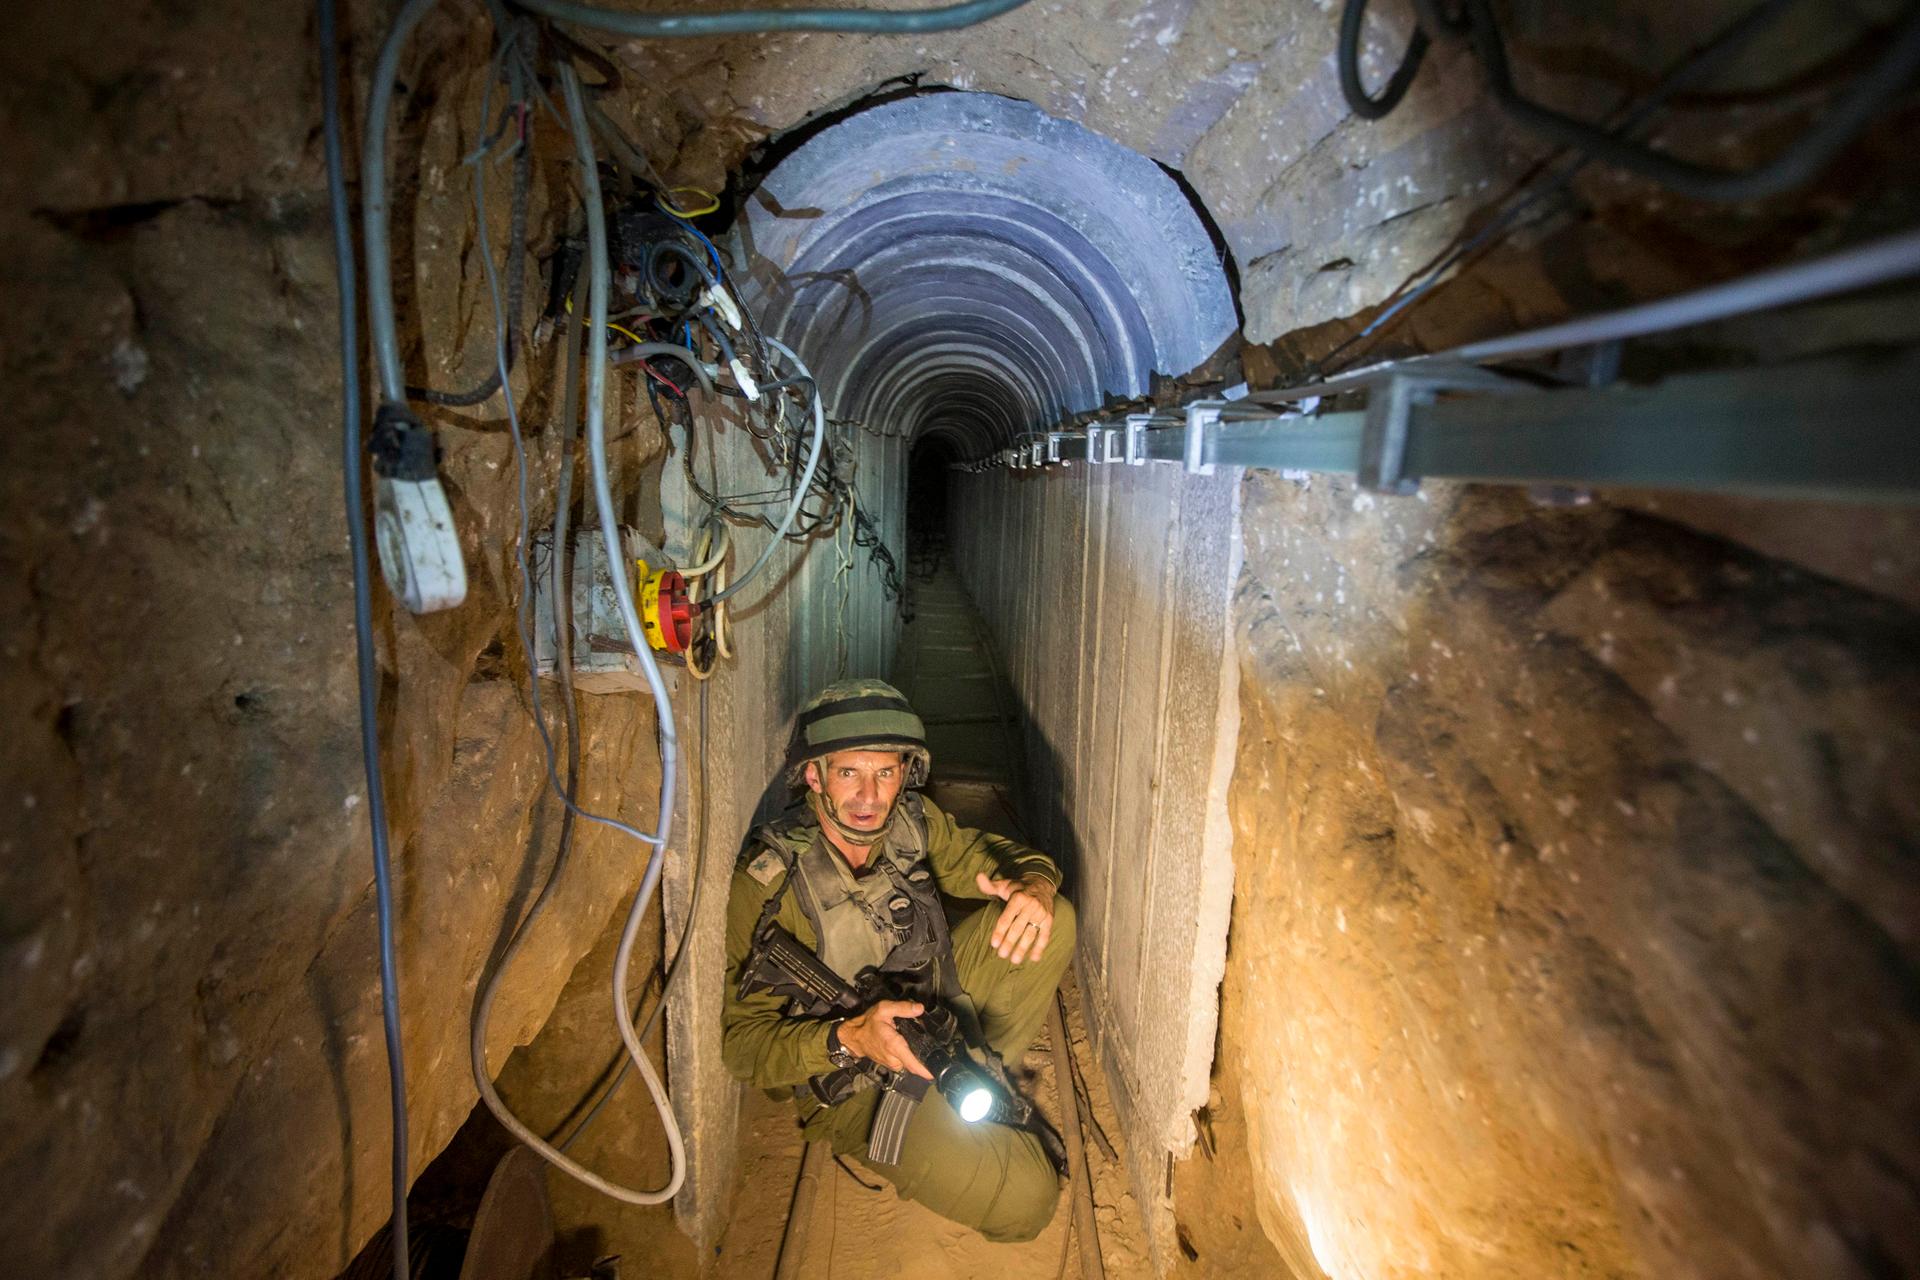 An Israeli army officer during an army-organized tour in a tunnel said to be used by Palestinian militants for cross-border attacks.